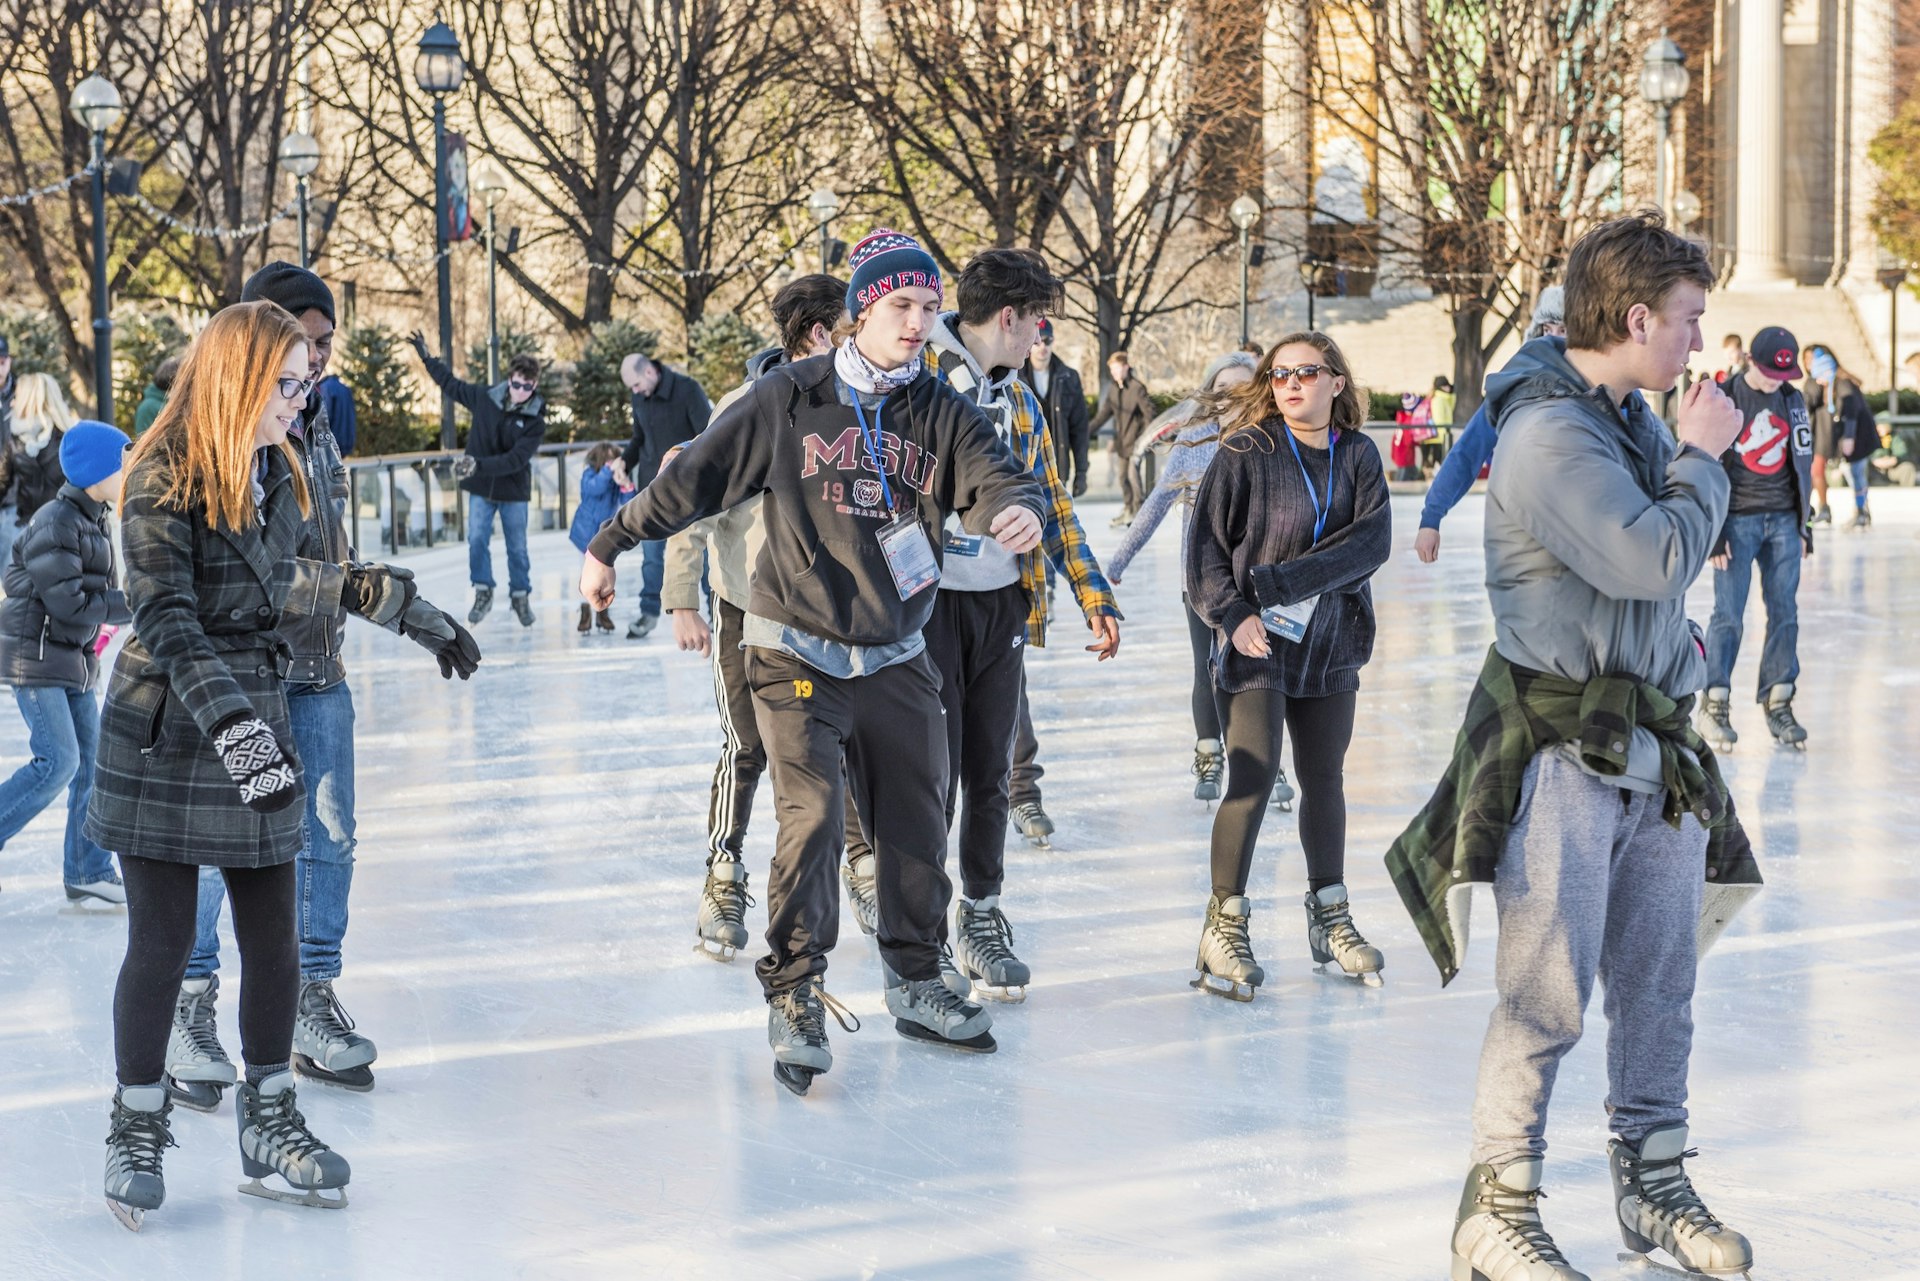 People skate on an ice rink in National Gallery of Art Sculpture garden in Washington, DC.